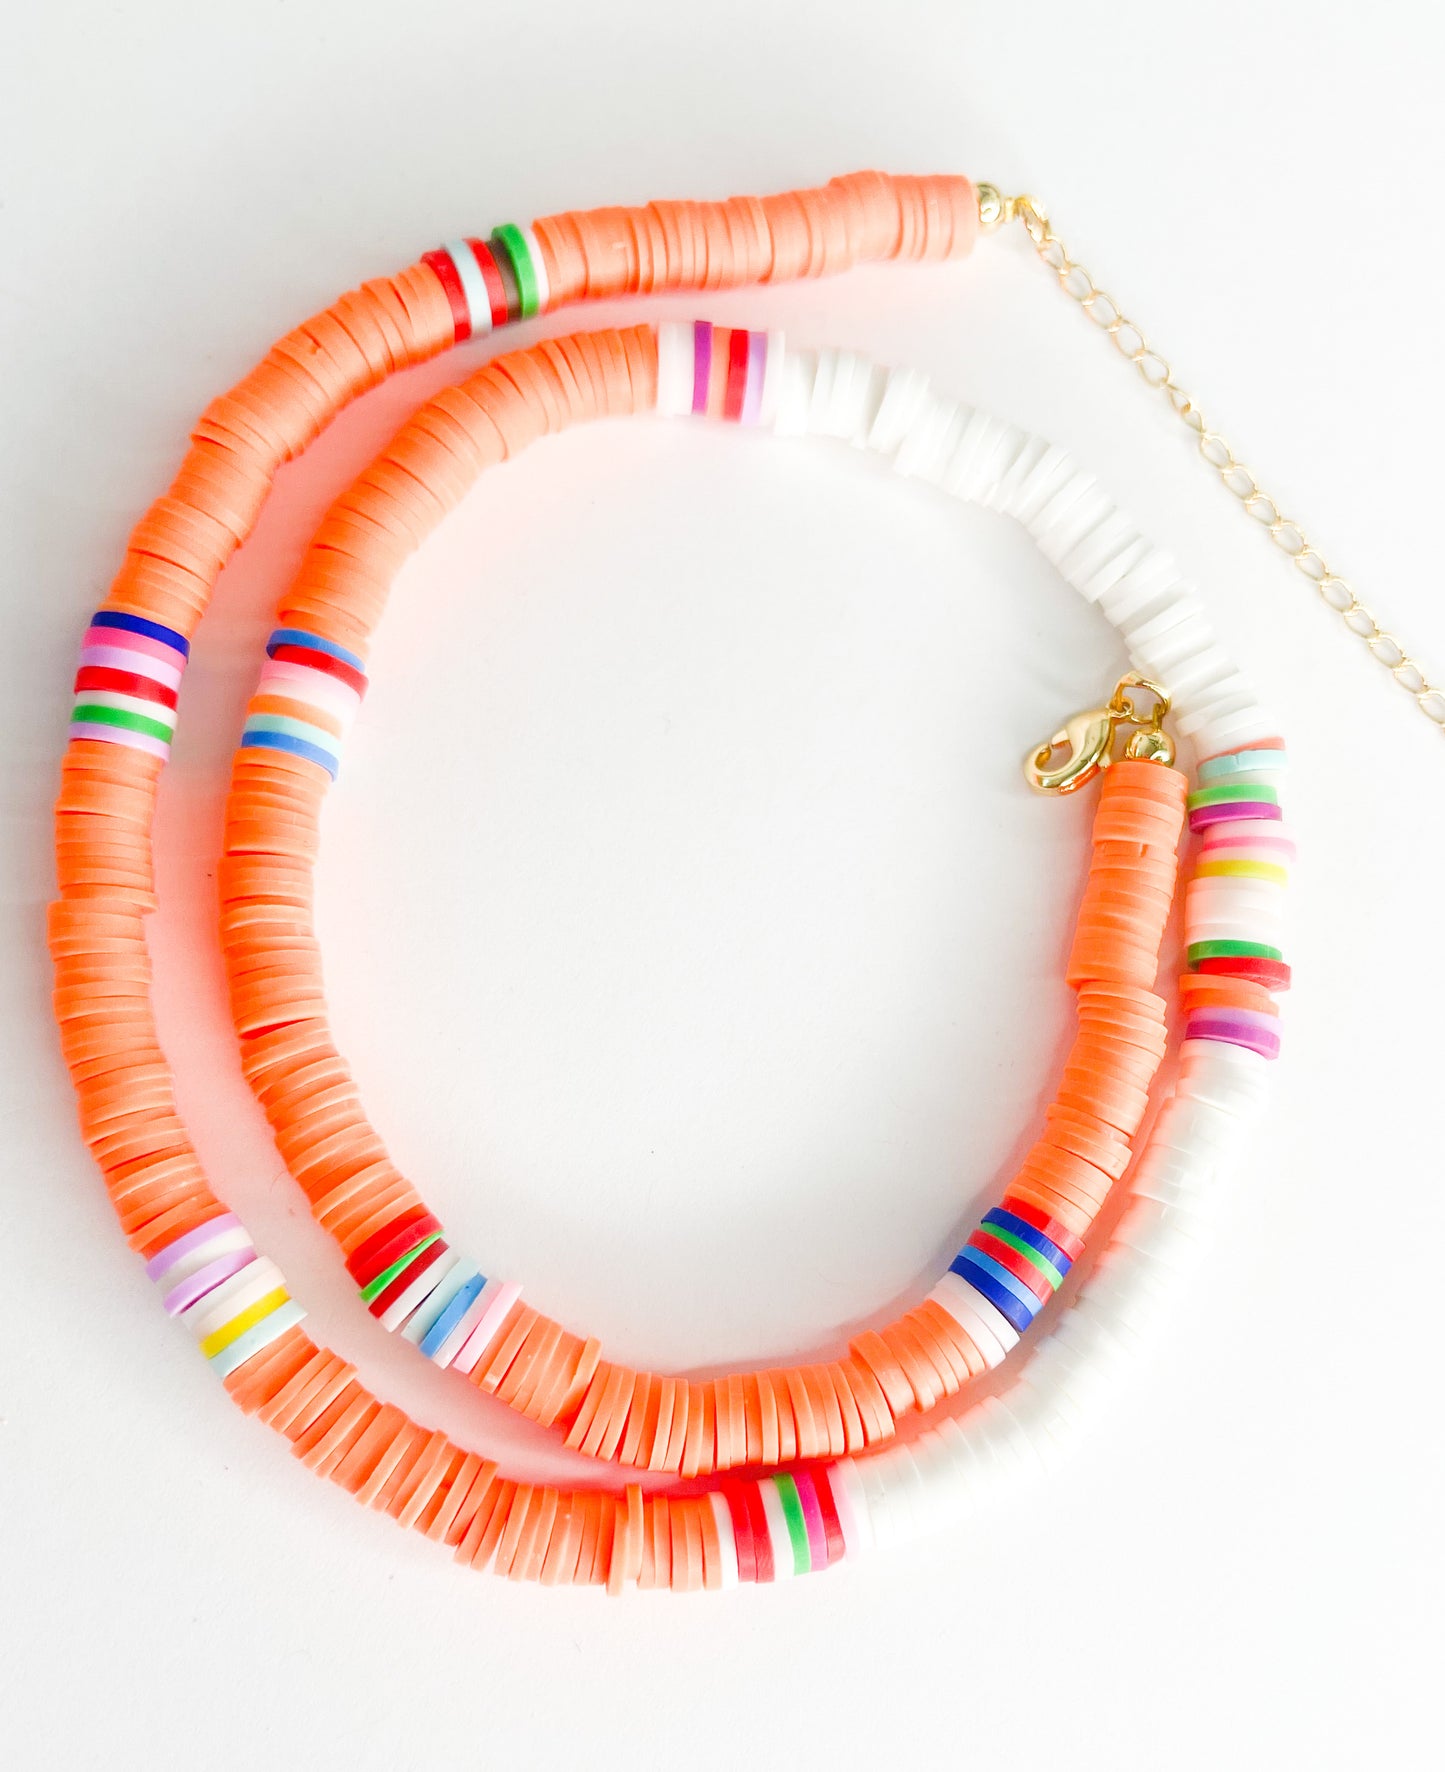 17in W 2in Extender Neon Orange Rubber Necklace-Stainless Steal Connector